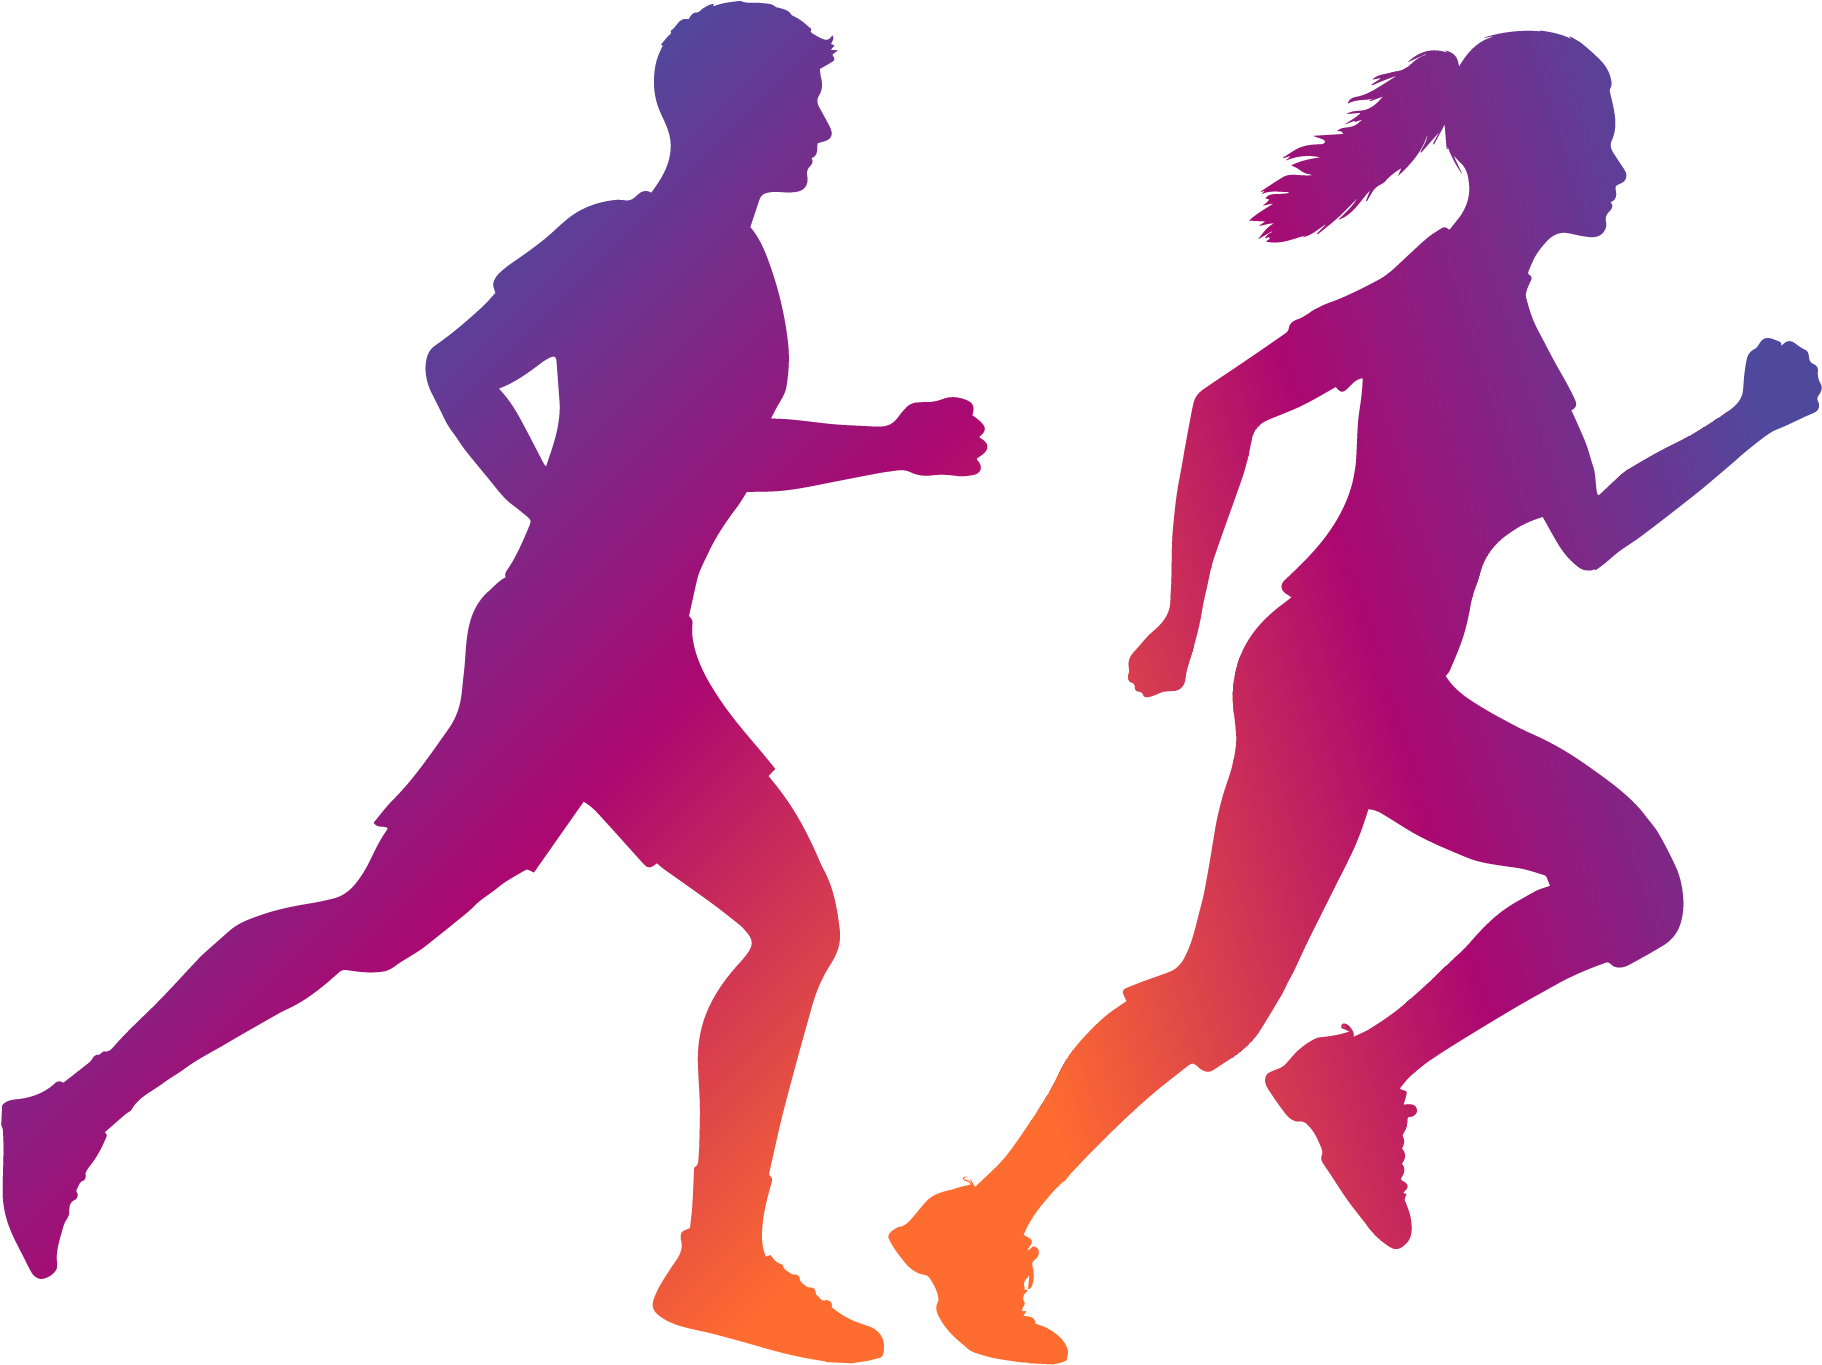 Download and share clipart about Marathon Walking Silhouette Images Reverse...